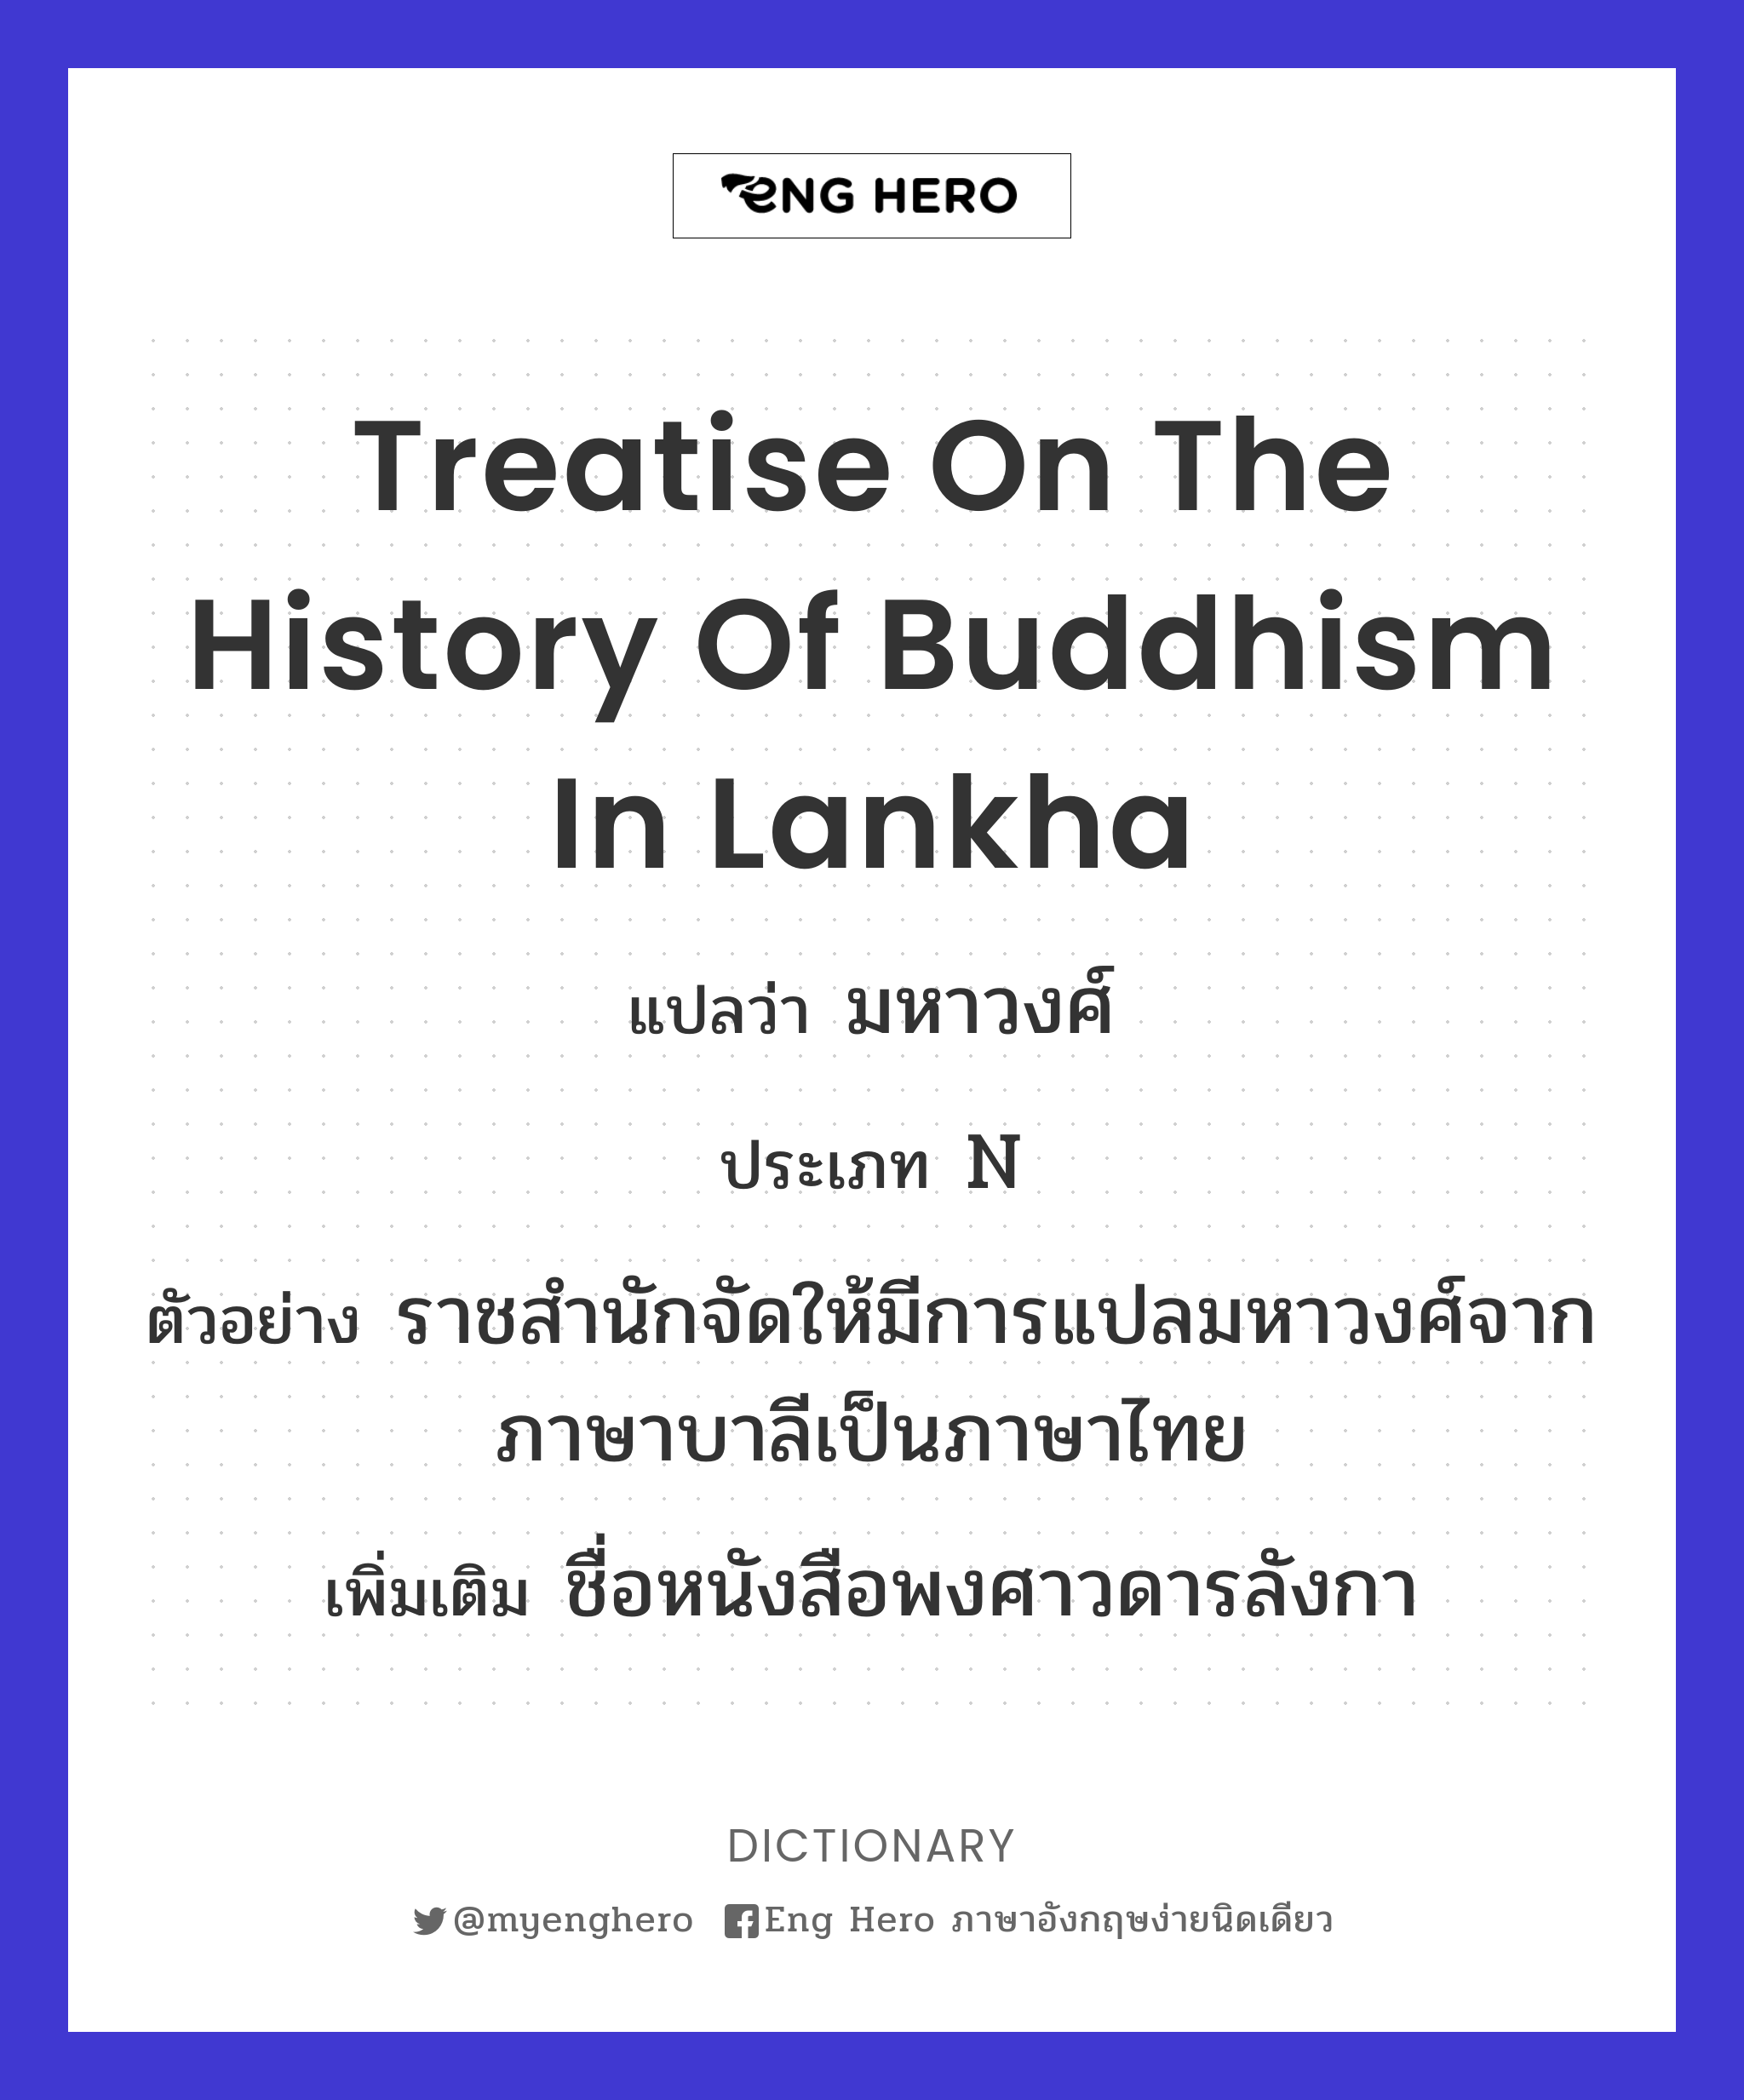 treatise on the history of Buddhism in Lankha